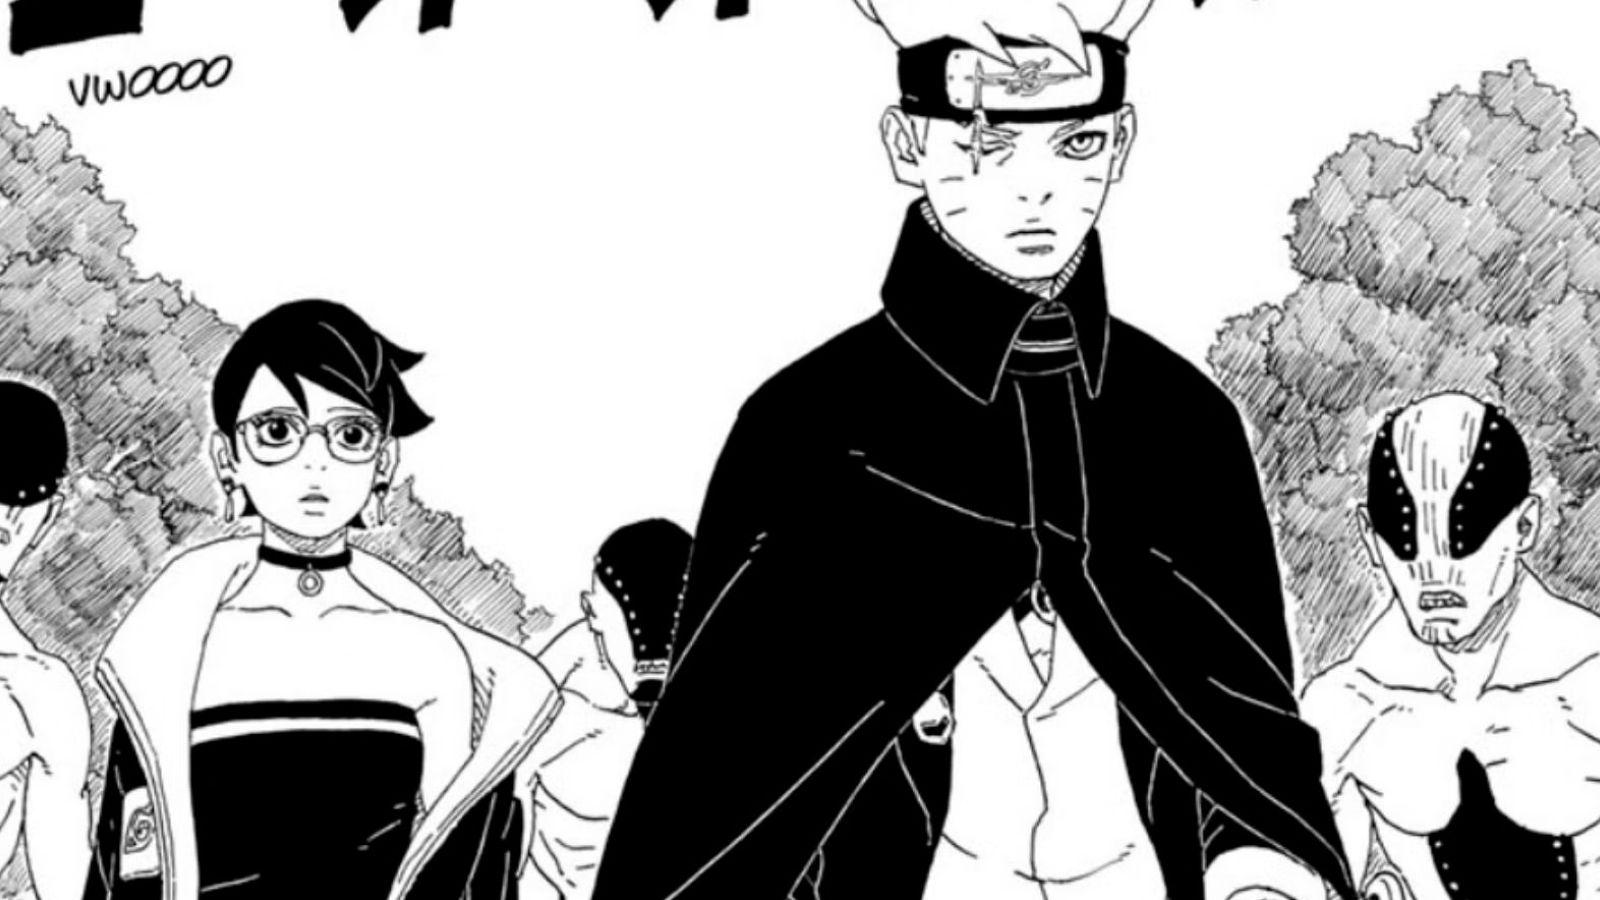 A panel from Boruto part 2